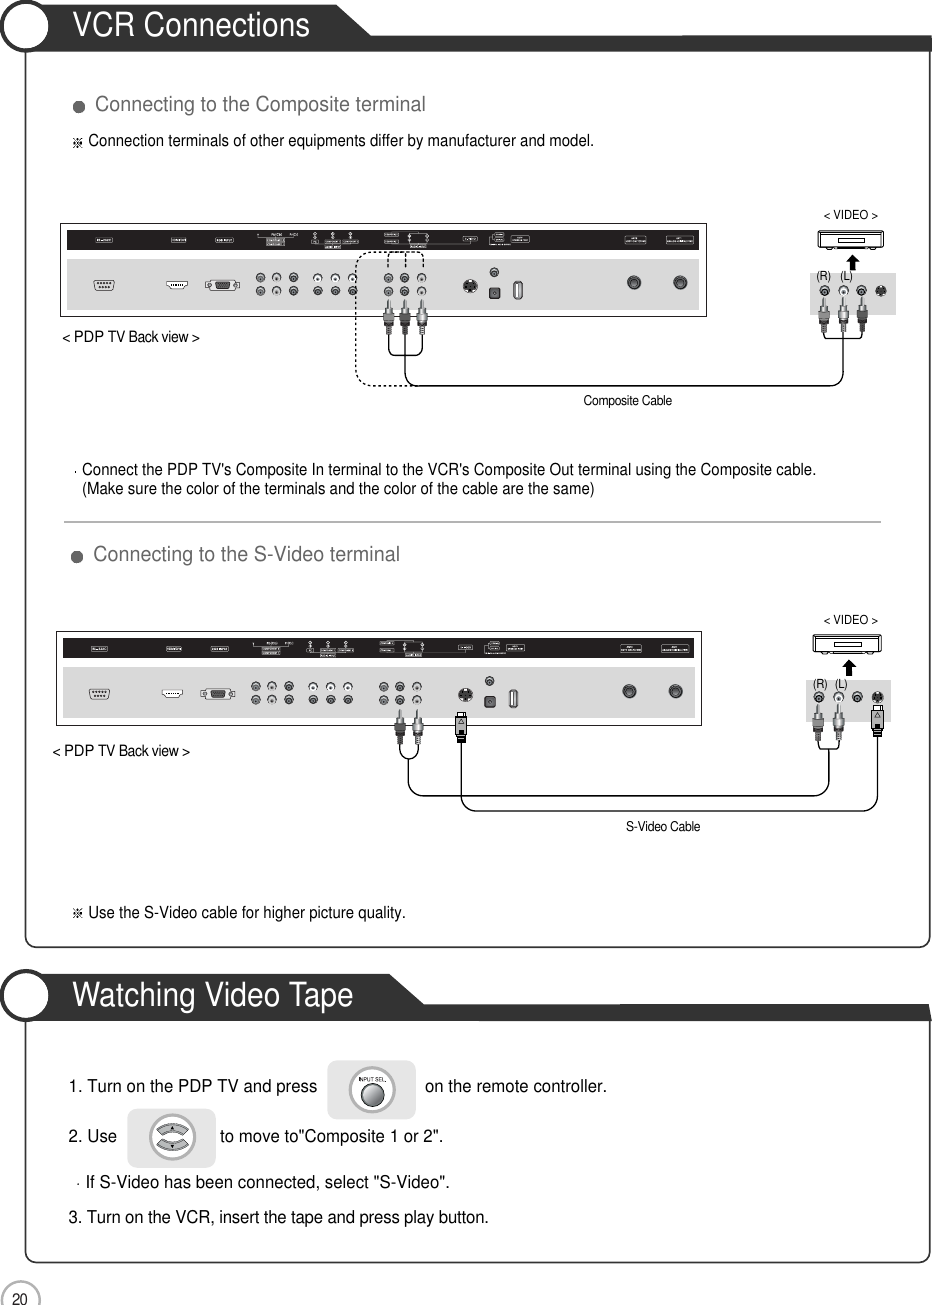 20VCR ConnectionsWatching Video TapeConnection1. Turn on the PDP TV and press                       on the remote controller.2. Use                      to move to&quot;Composite 1 or 2&quot;.If S-Video has been connected, select &quot;S-Video&quot;.3. Turn on the VCR, insert the tape and press play button.Connect the PDP TV&apos;s Composite In terminal to the VCR&apos;s Composite Out terminal using the Composite cable.(Make sure the color of the terminals and the color of the cable are the same)Use the S-Video cable for higher picture quality.Connection terminals of other equipments differ by manufacturer and model.&lt; PDPTV Back view &gt;Composite CableS-Video Cable(R) (L)&lt; VIDEO &gt;(R) (L)&lt; VIDEO &gt;Connecting to the Composite terminalConnecting to the S-Video terminal&lt; PDPTV Back view &gt;